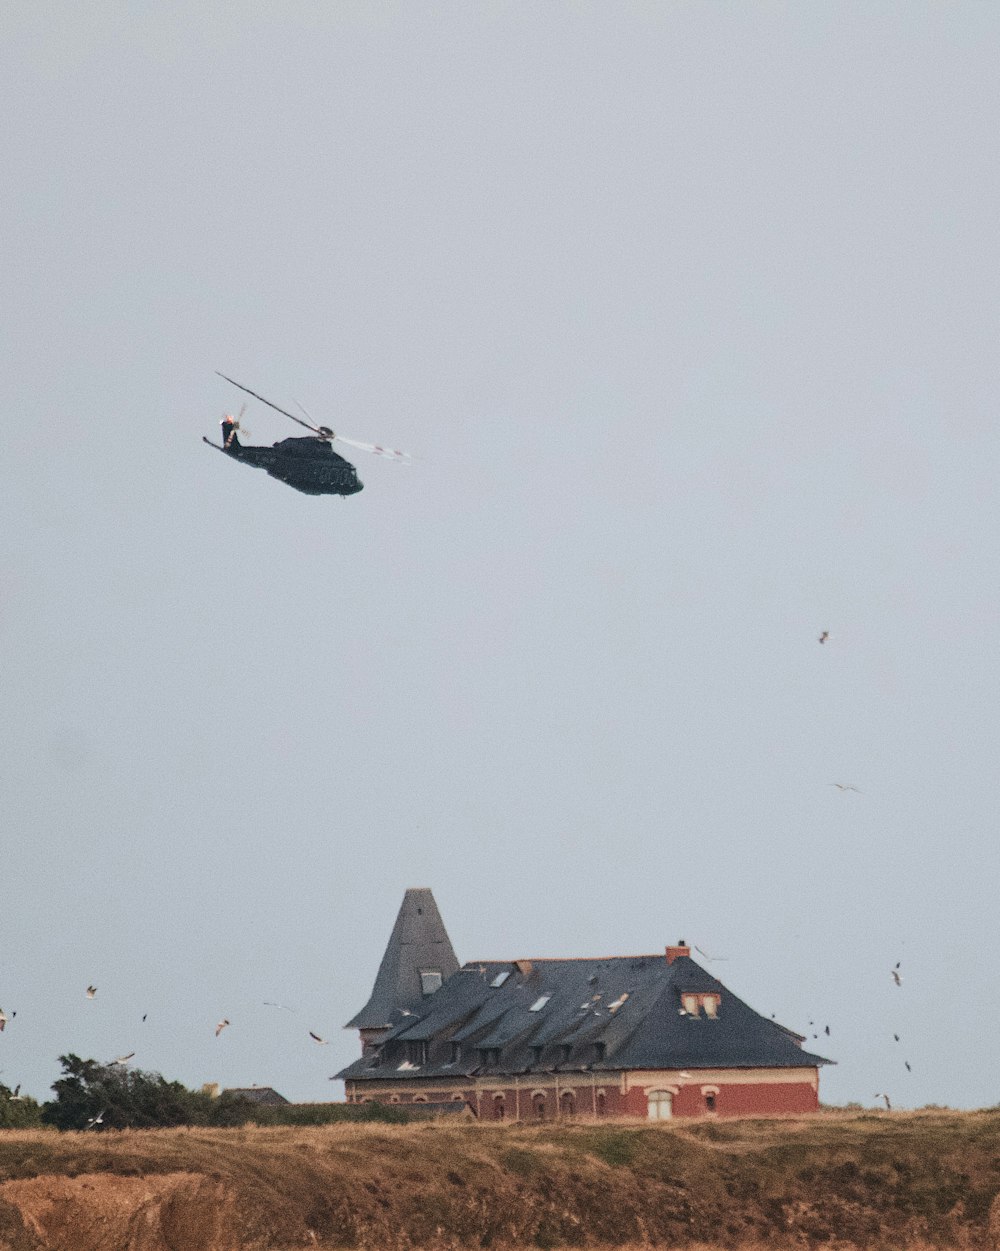 a helicopter flying over a house